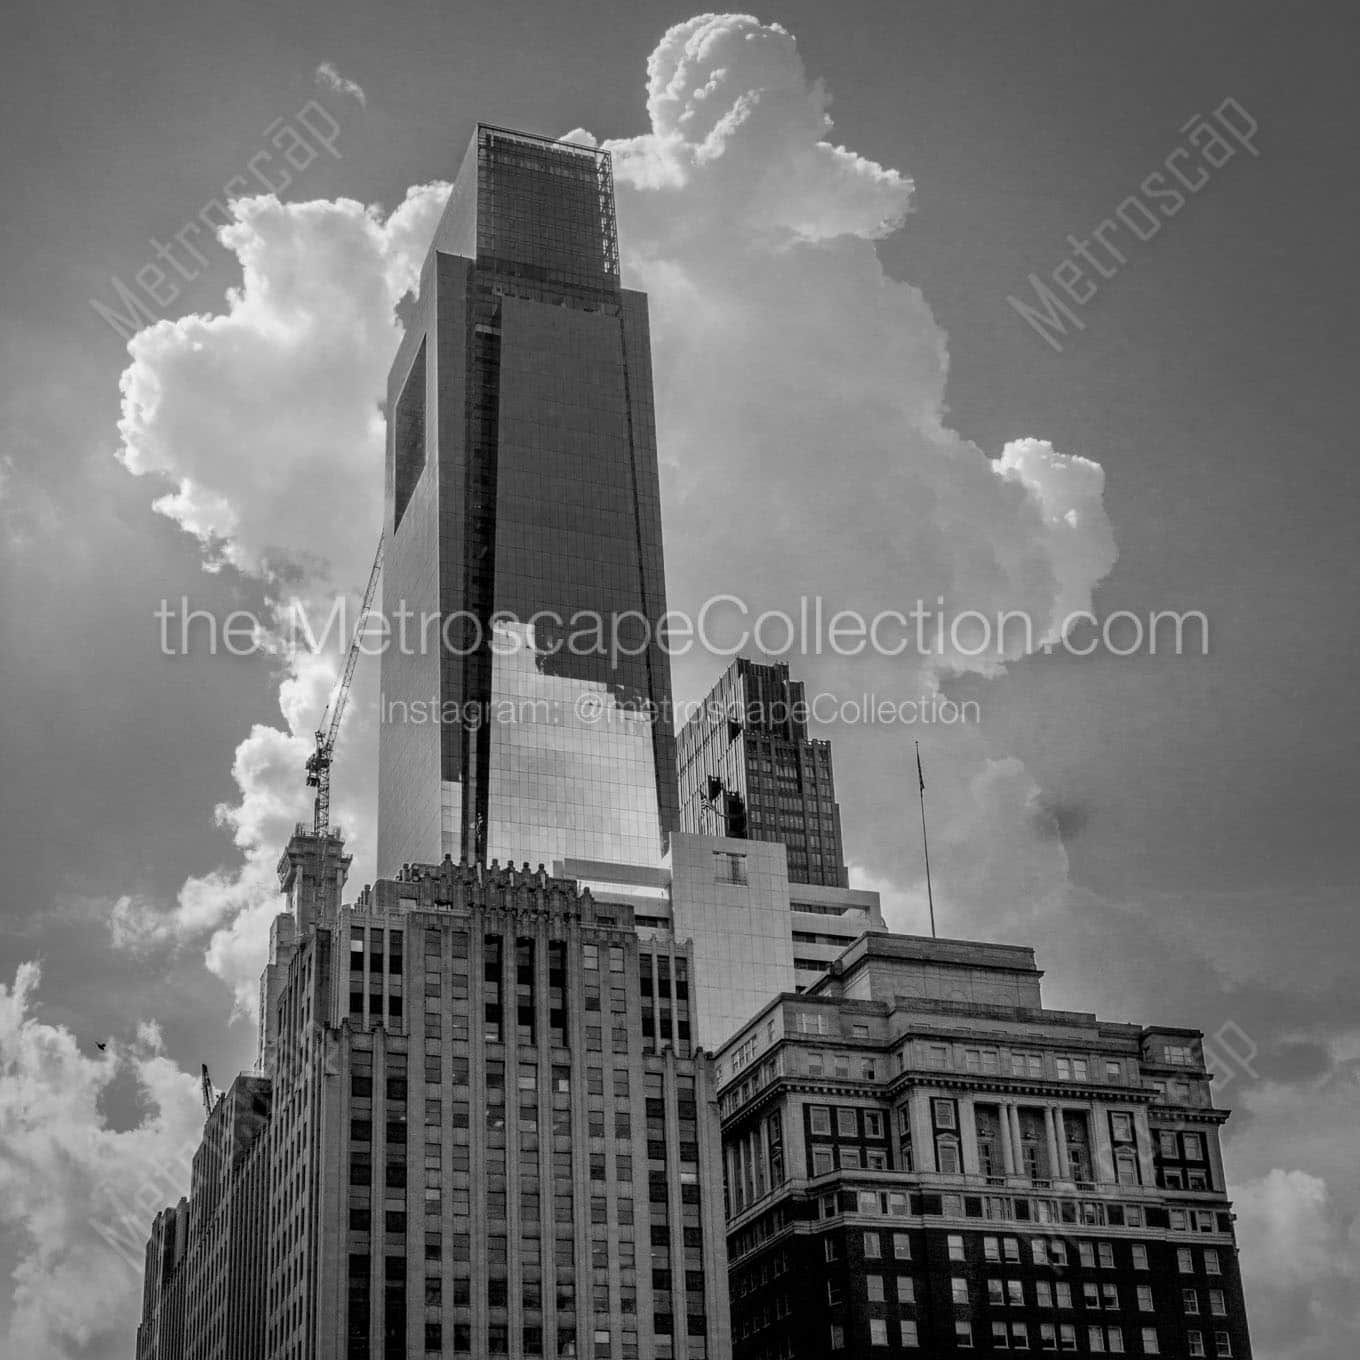 thunder cloud over comcast tower downtown philly Black & White Wall Art